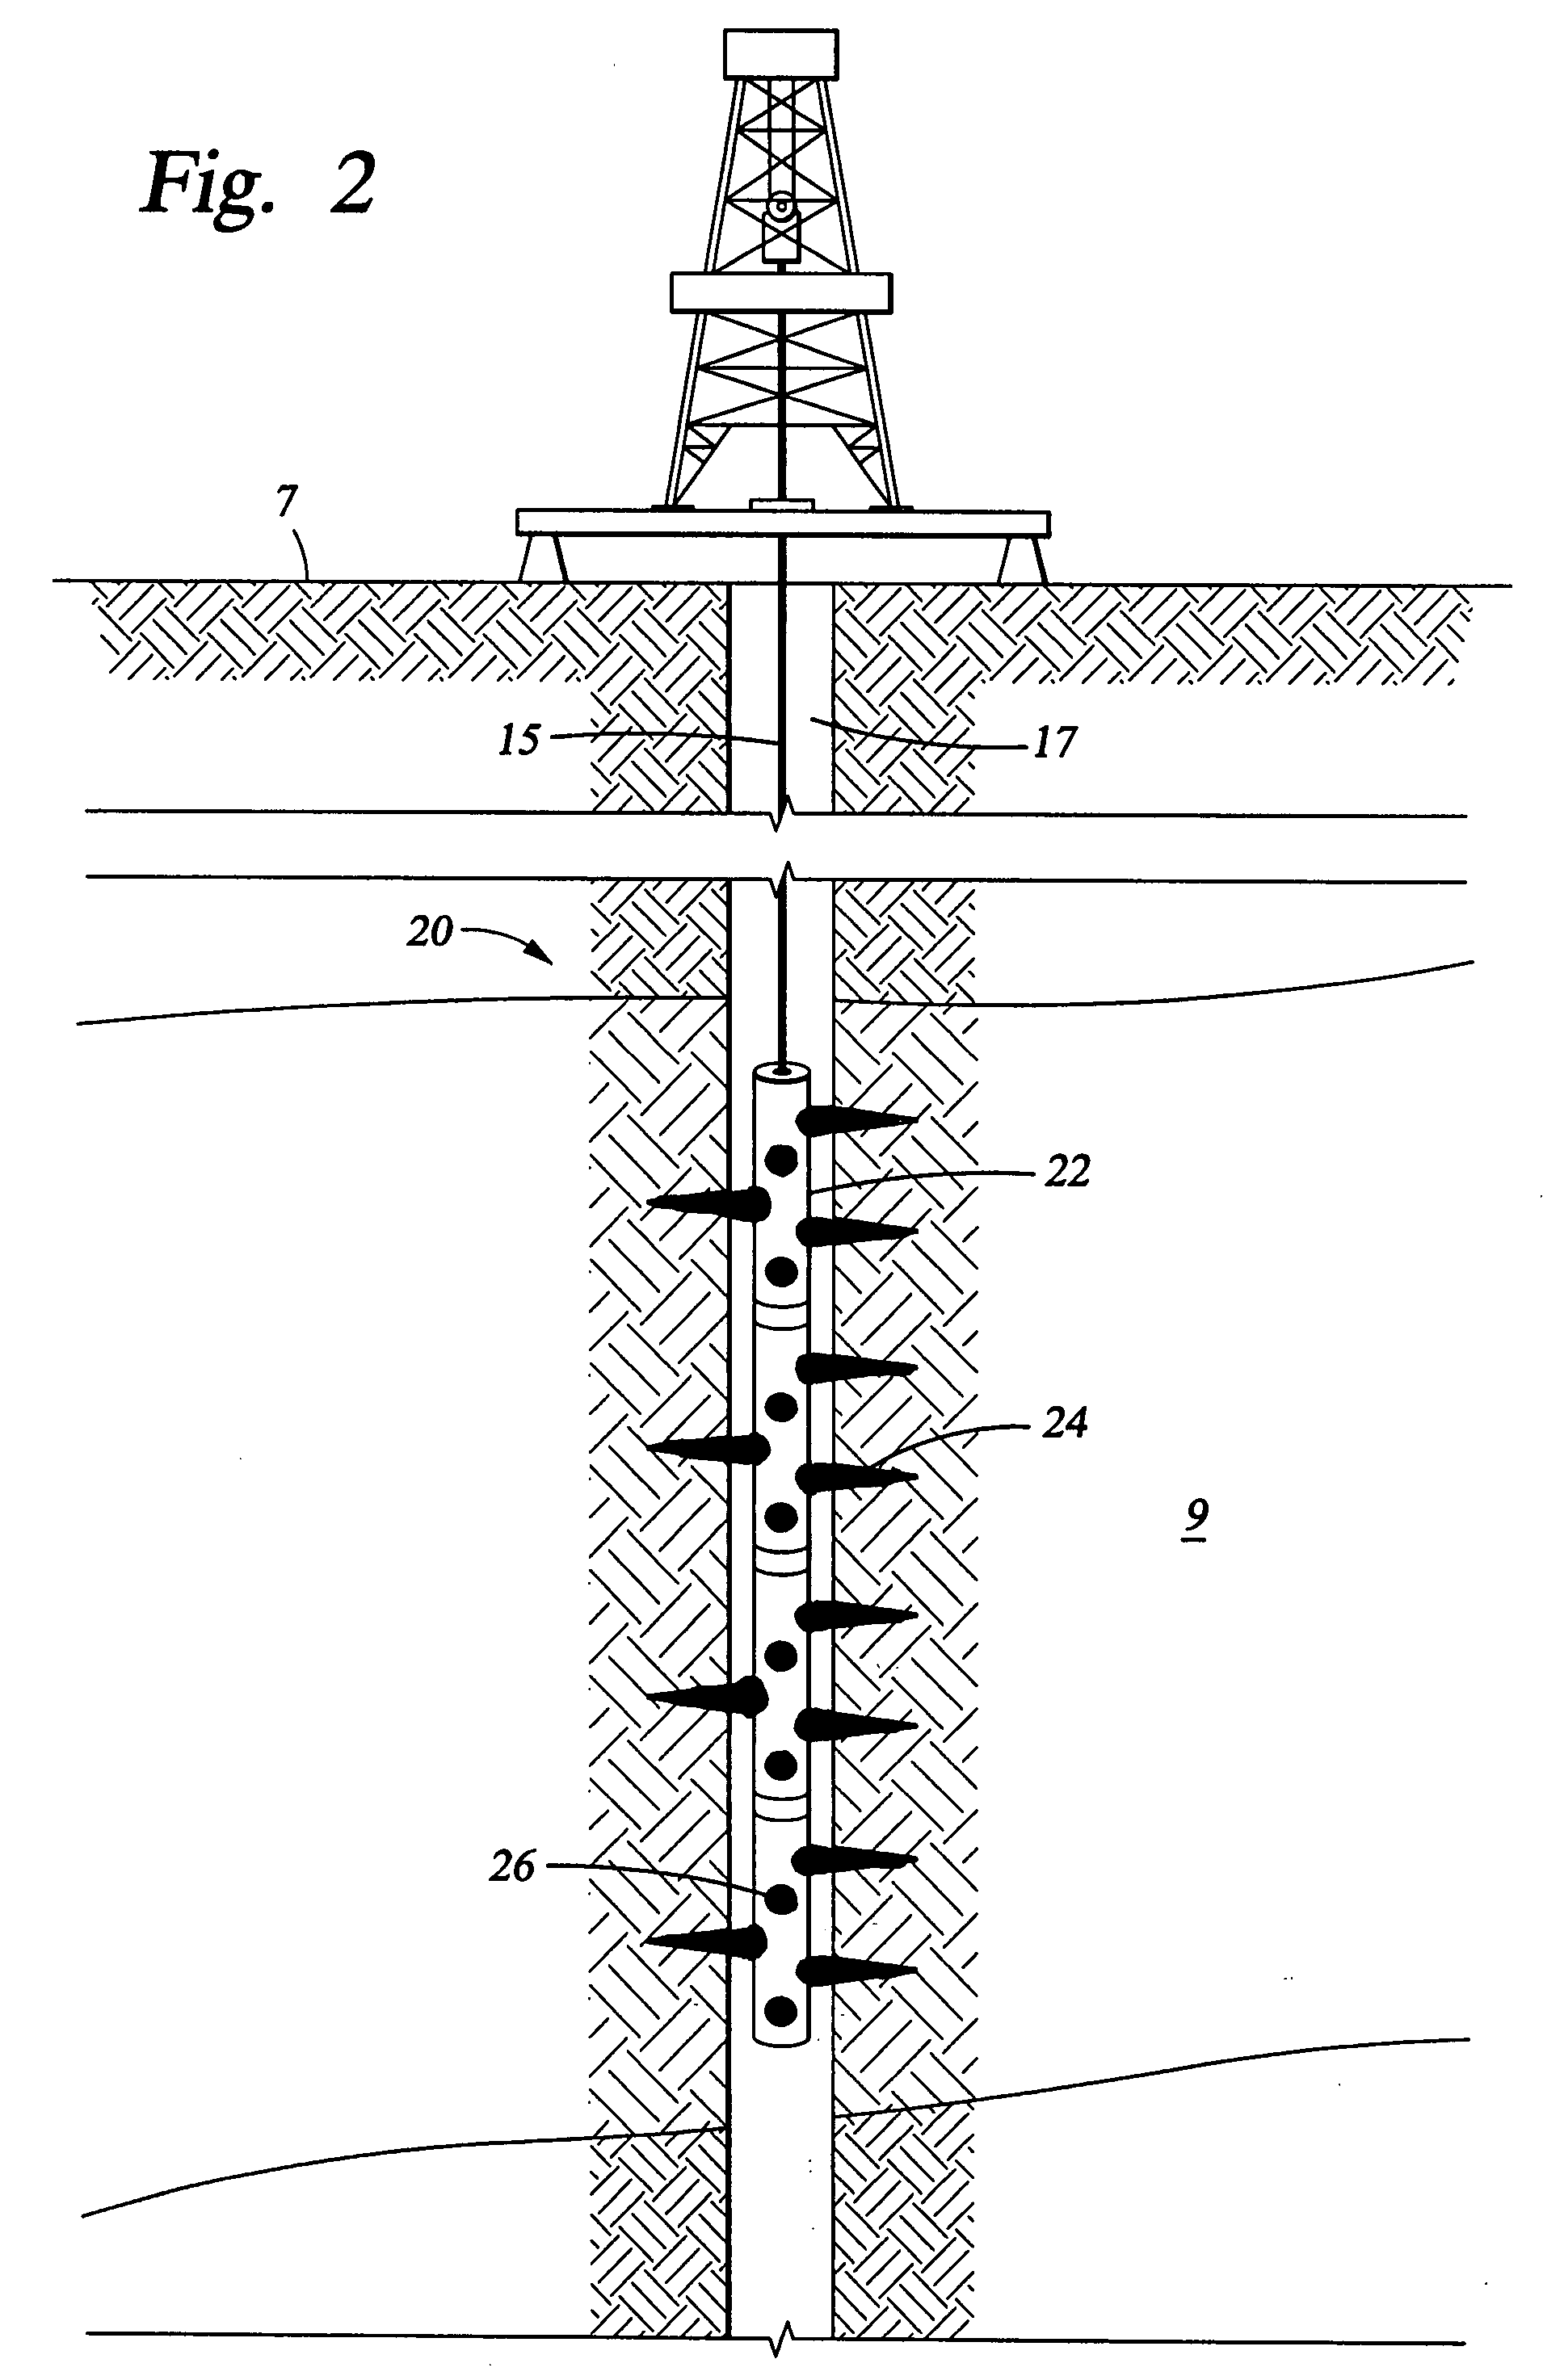 Perforating system comprising an energetic material